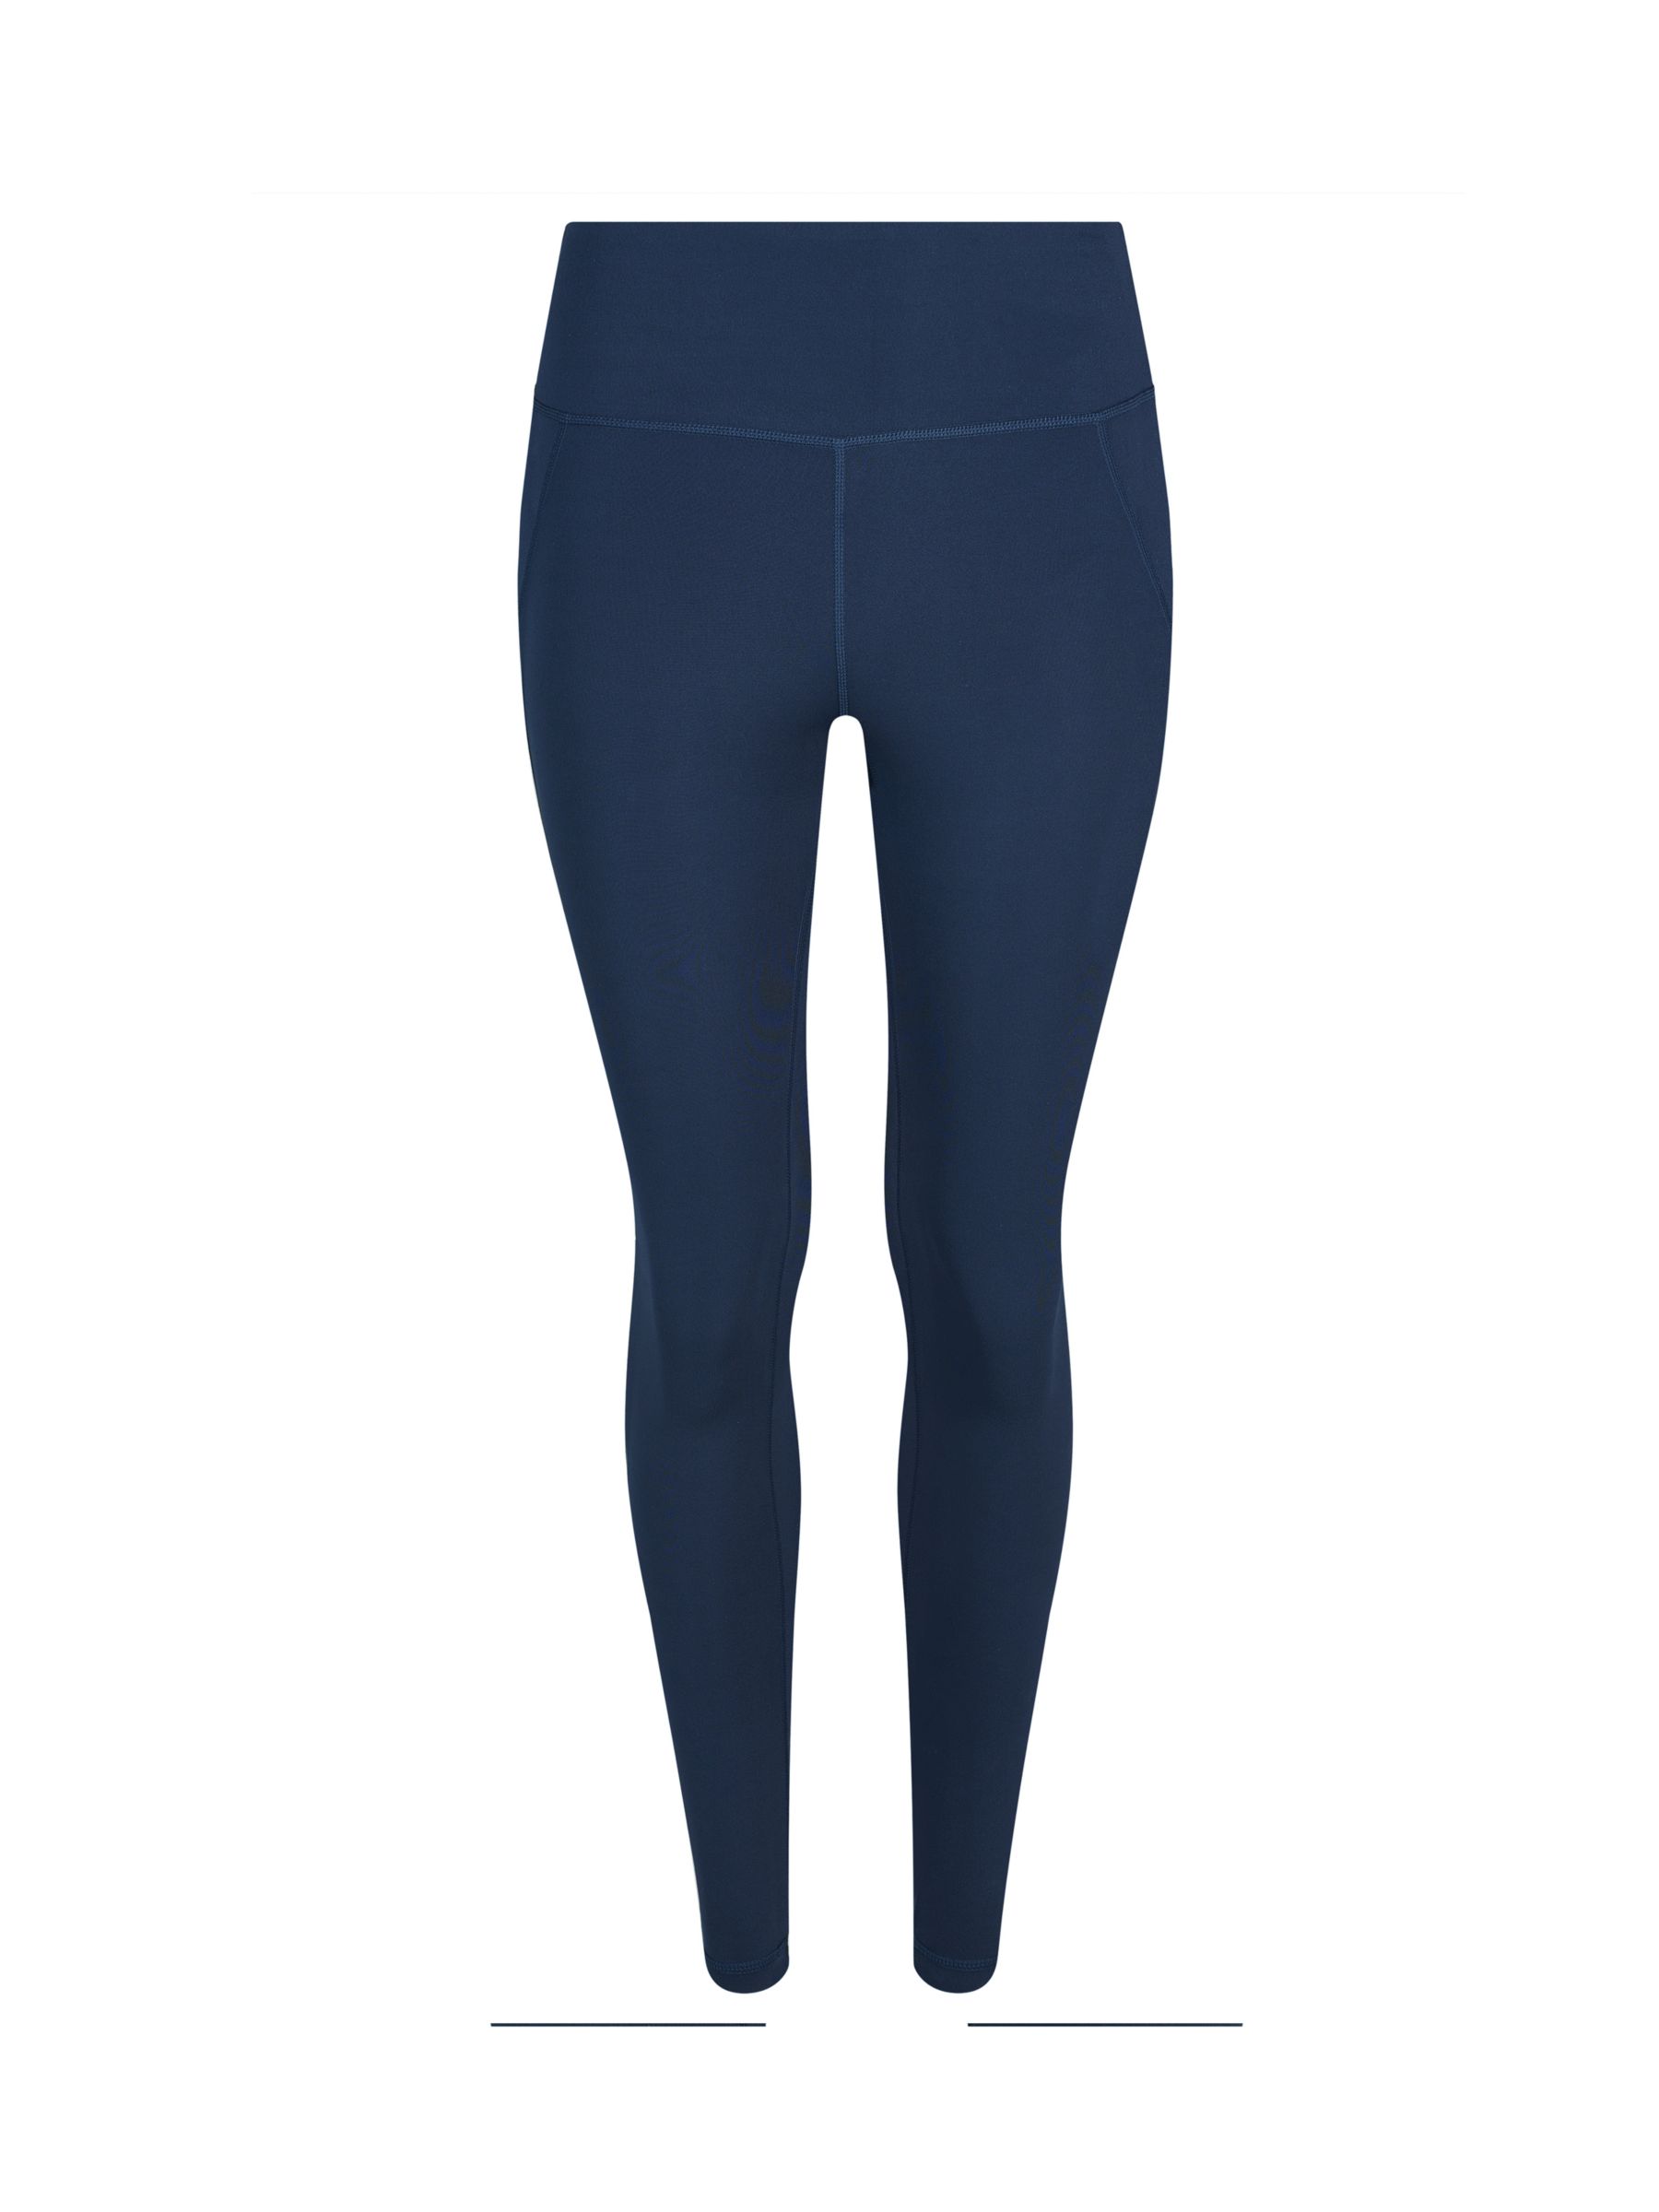 Buy Sweaty Betty All Day Leggings Online at johnlewis.com